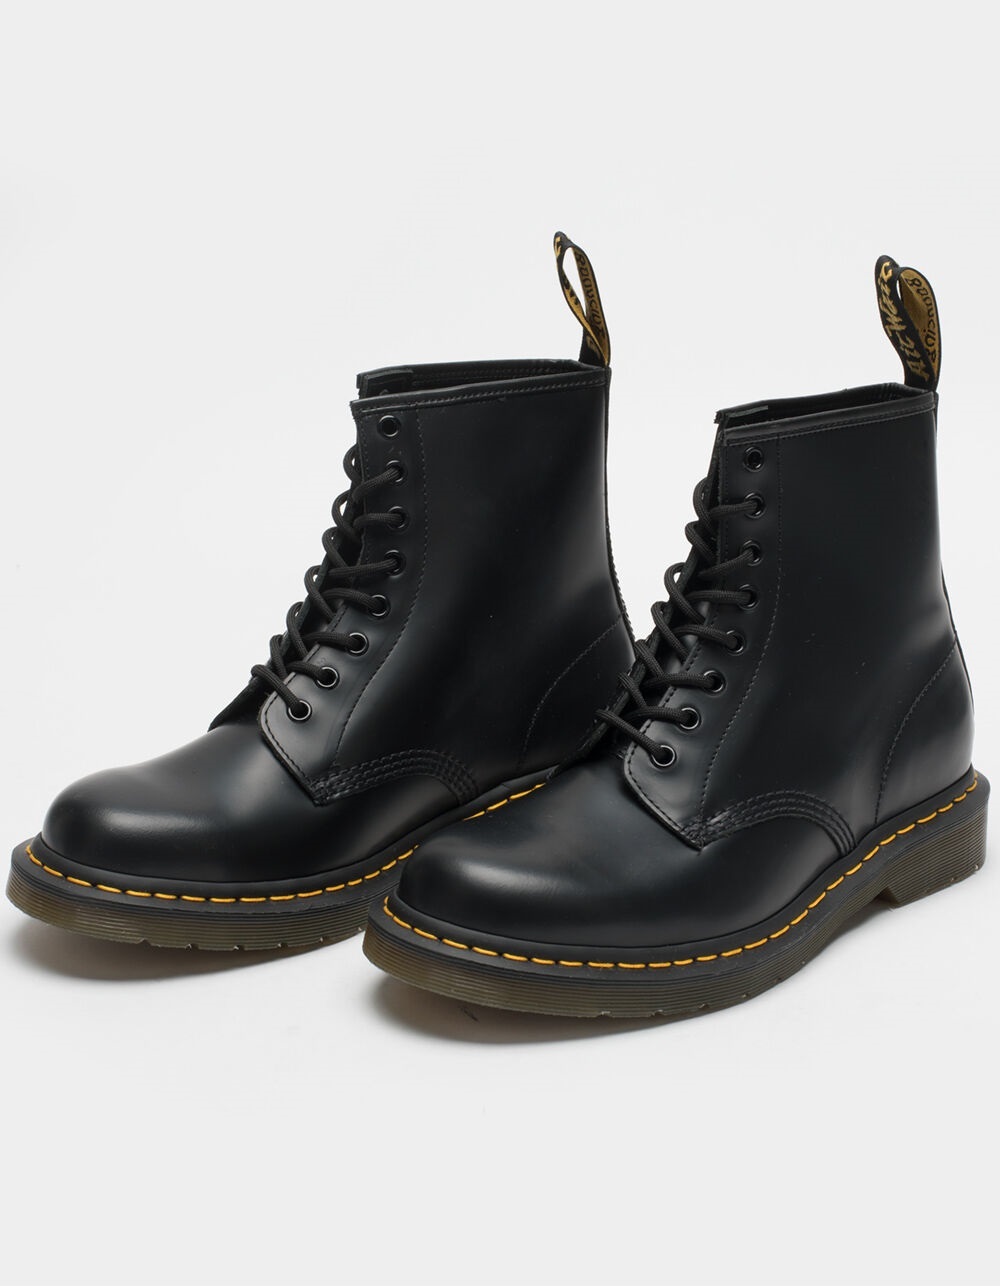 DR. MARTENS 1460 Smooth Leather Mens Boots - BLACK